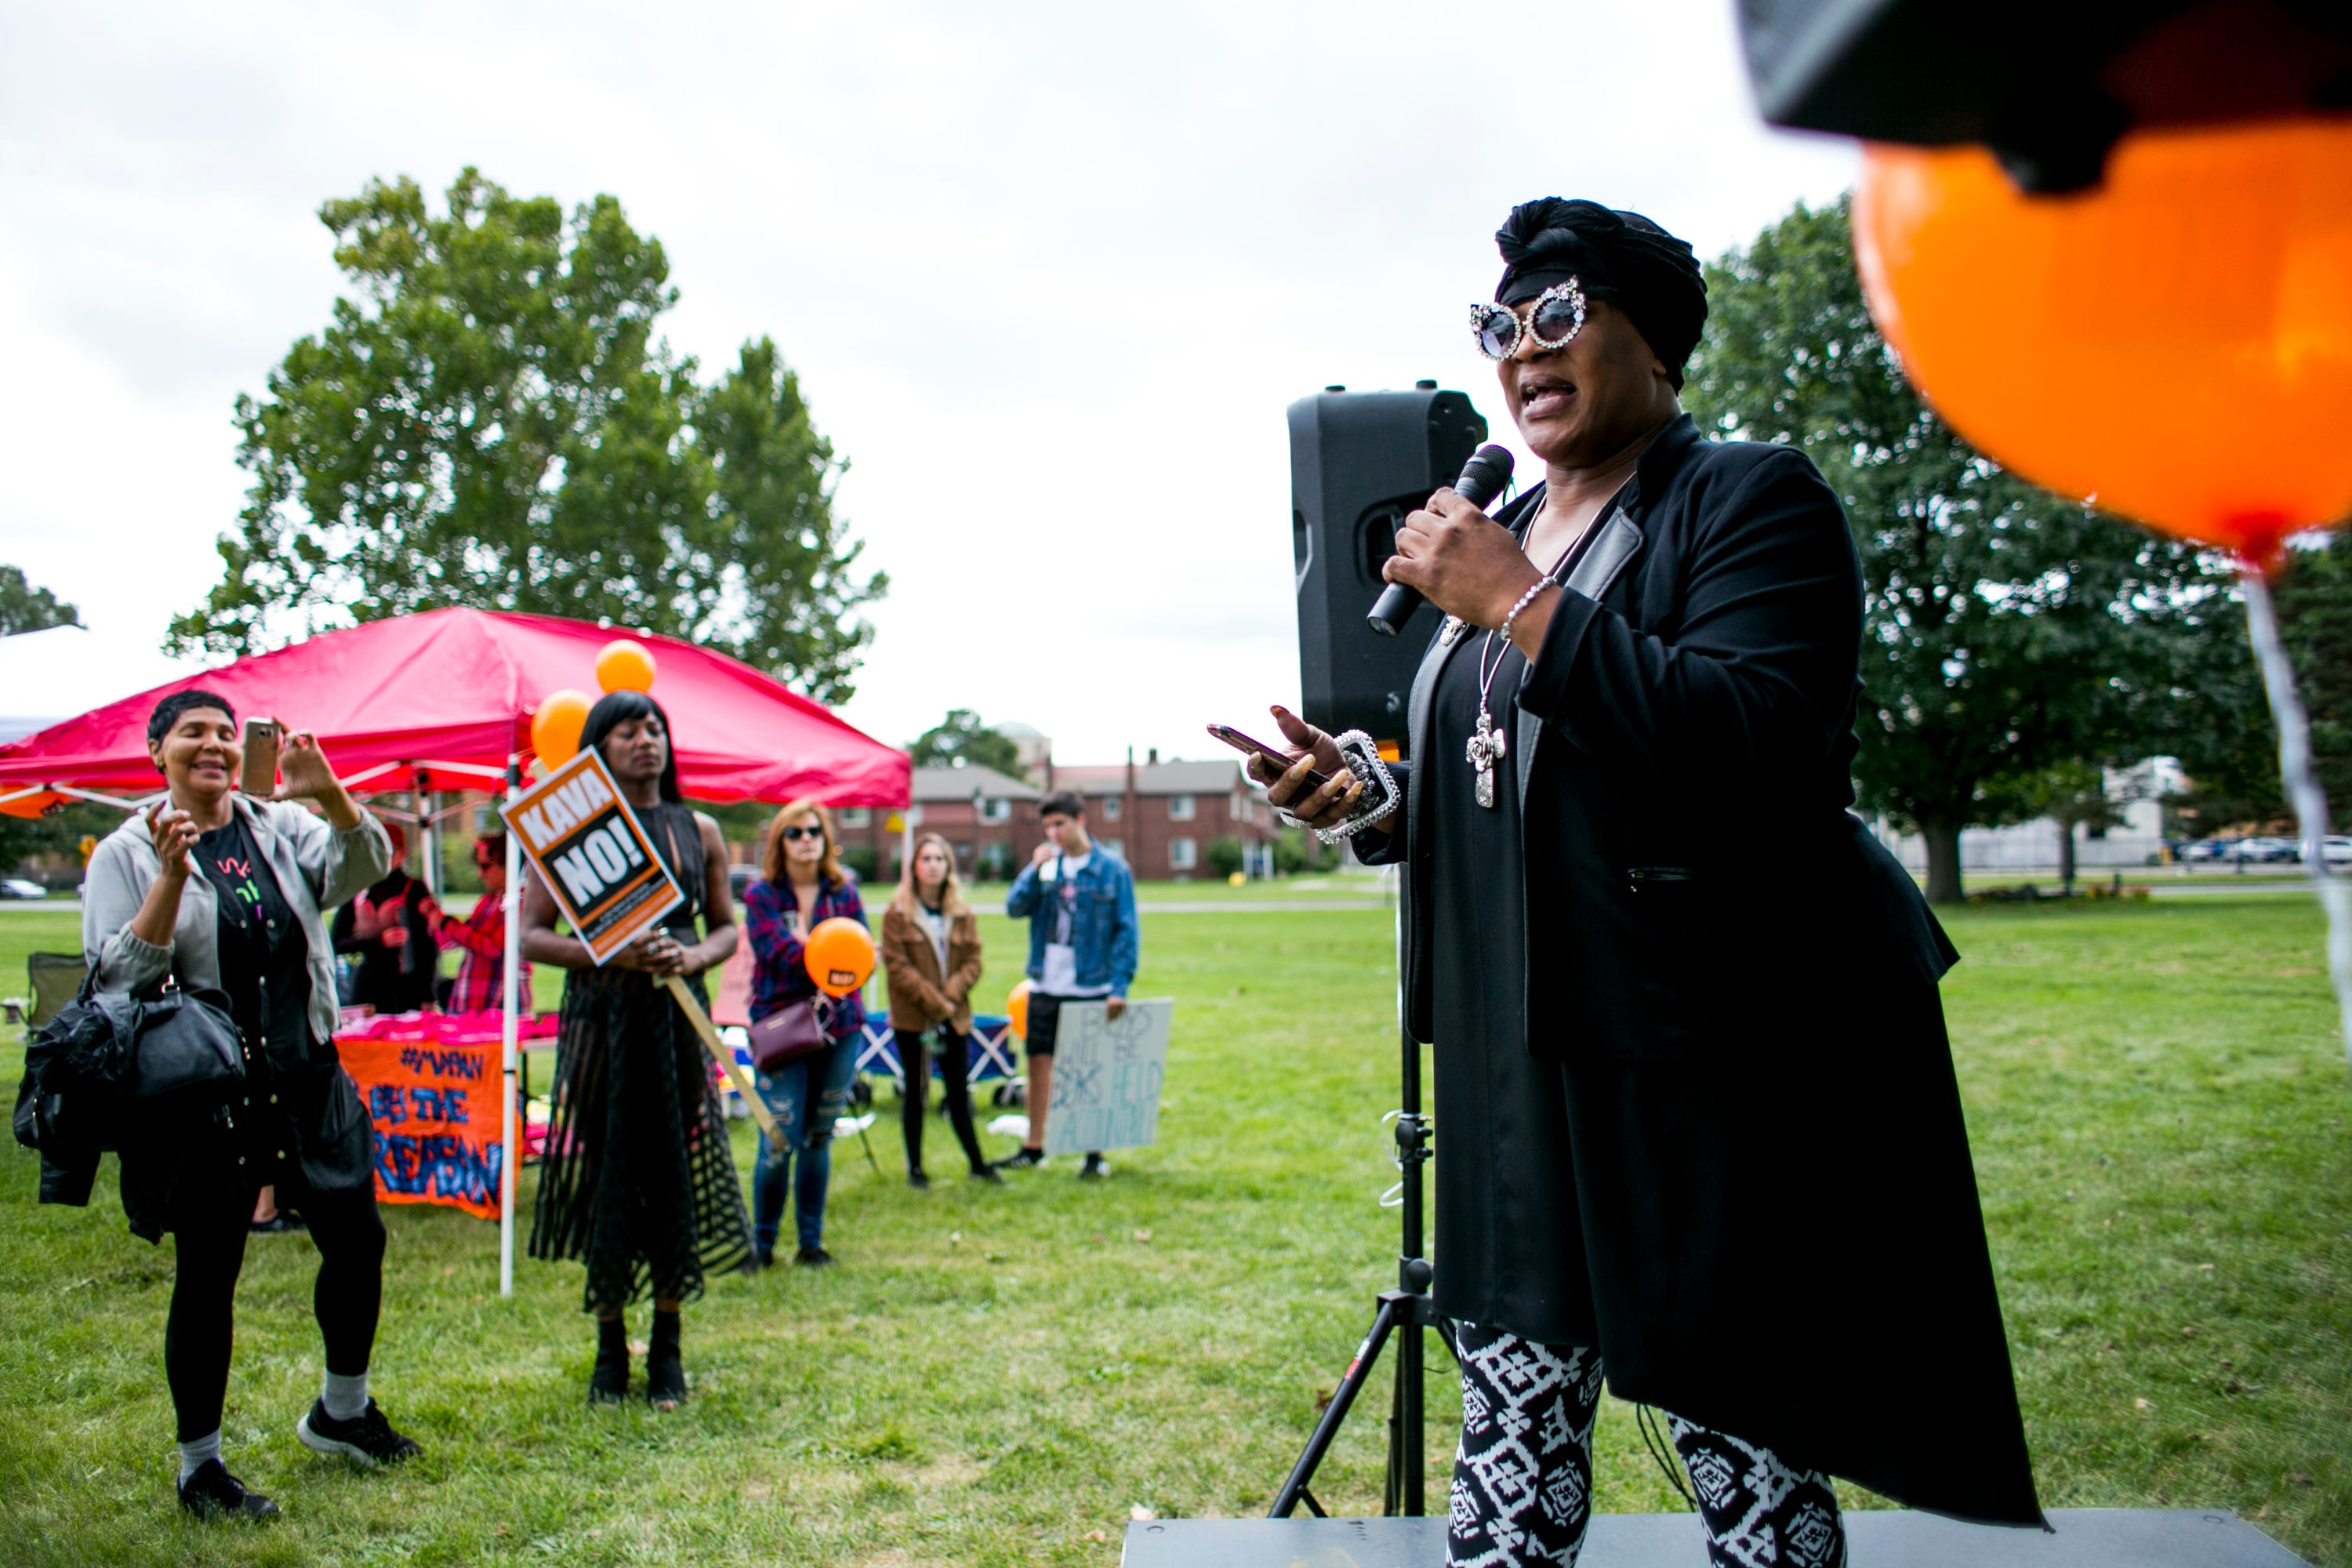 Jey'nce Poindexter, a Transgender Victims Advocate at Equality Michigan speaks during the Slut Walk at Palmer Park in Detroit on September 22, 2018.  The march and rally brought out about 70 demonstrators protesting sexual violence and other forms of aggression against woman.